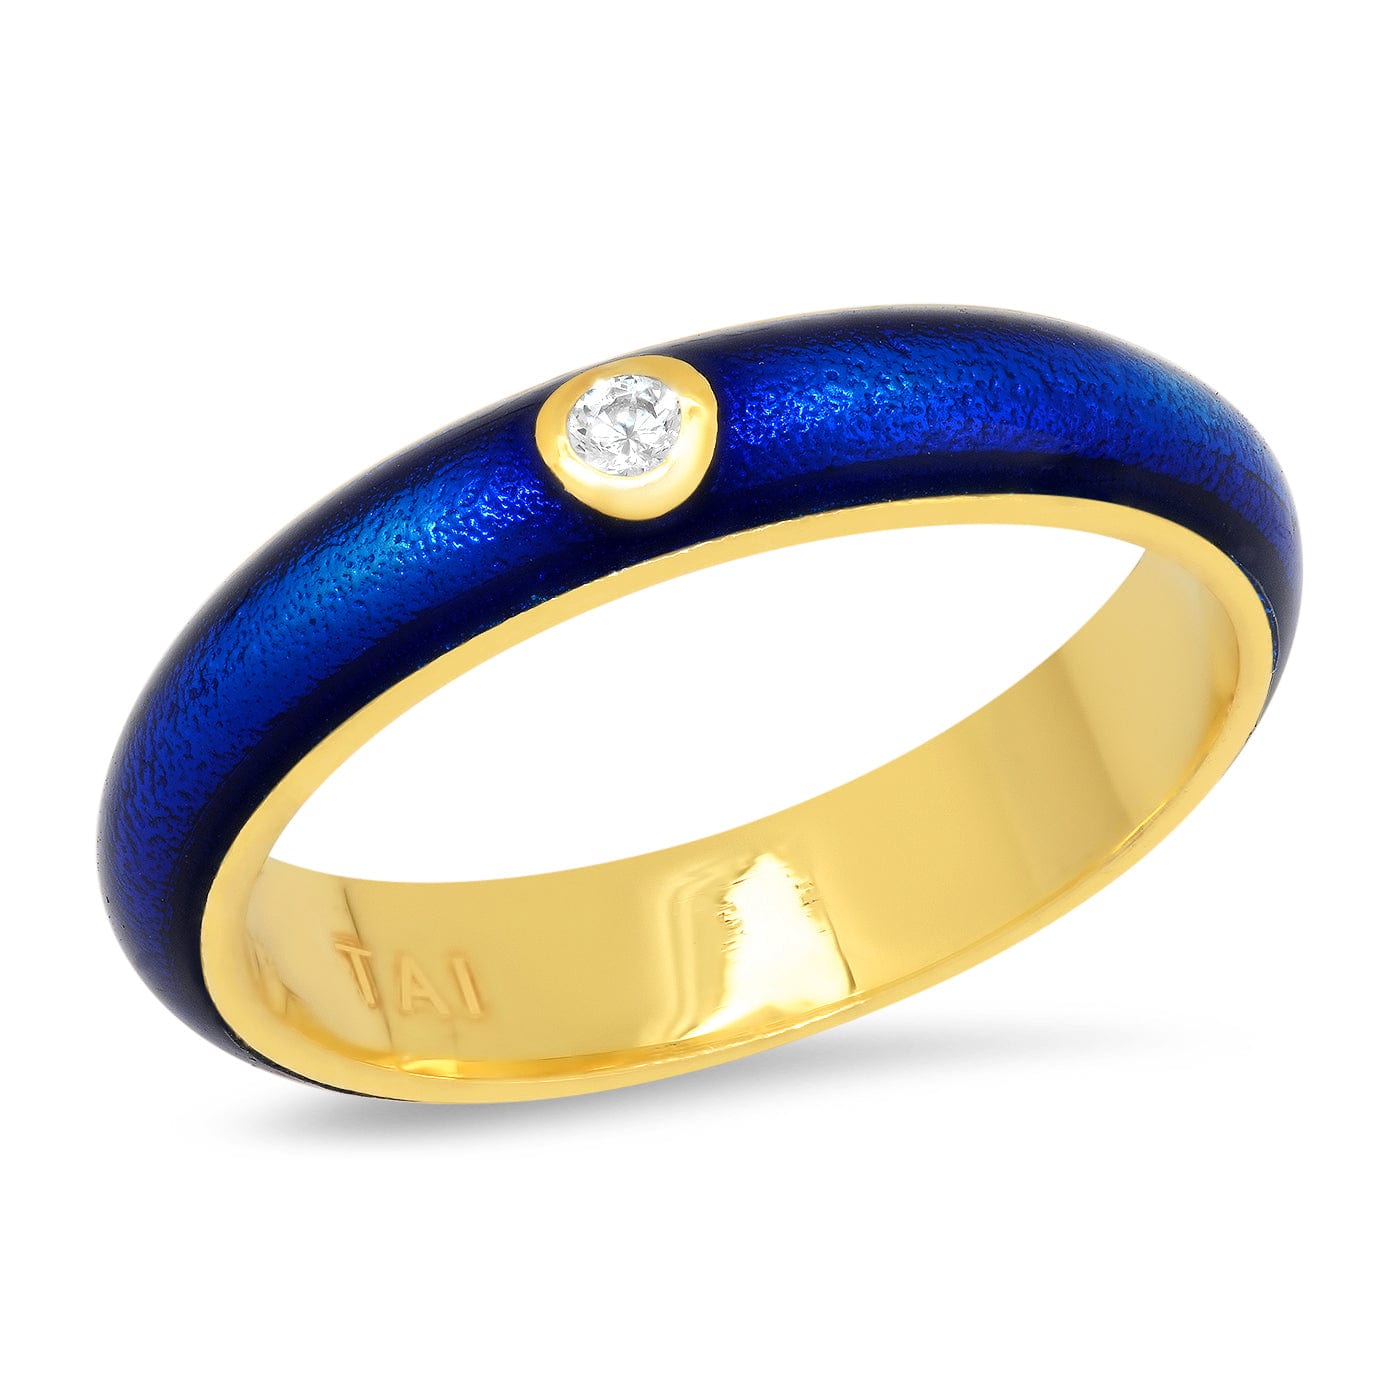 TAI JEWELRY Rings 6 / Navy Enamel Ring With Single Cz Accent